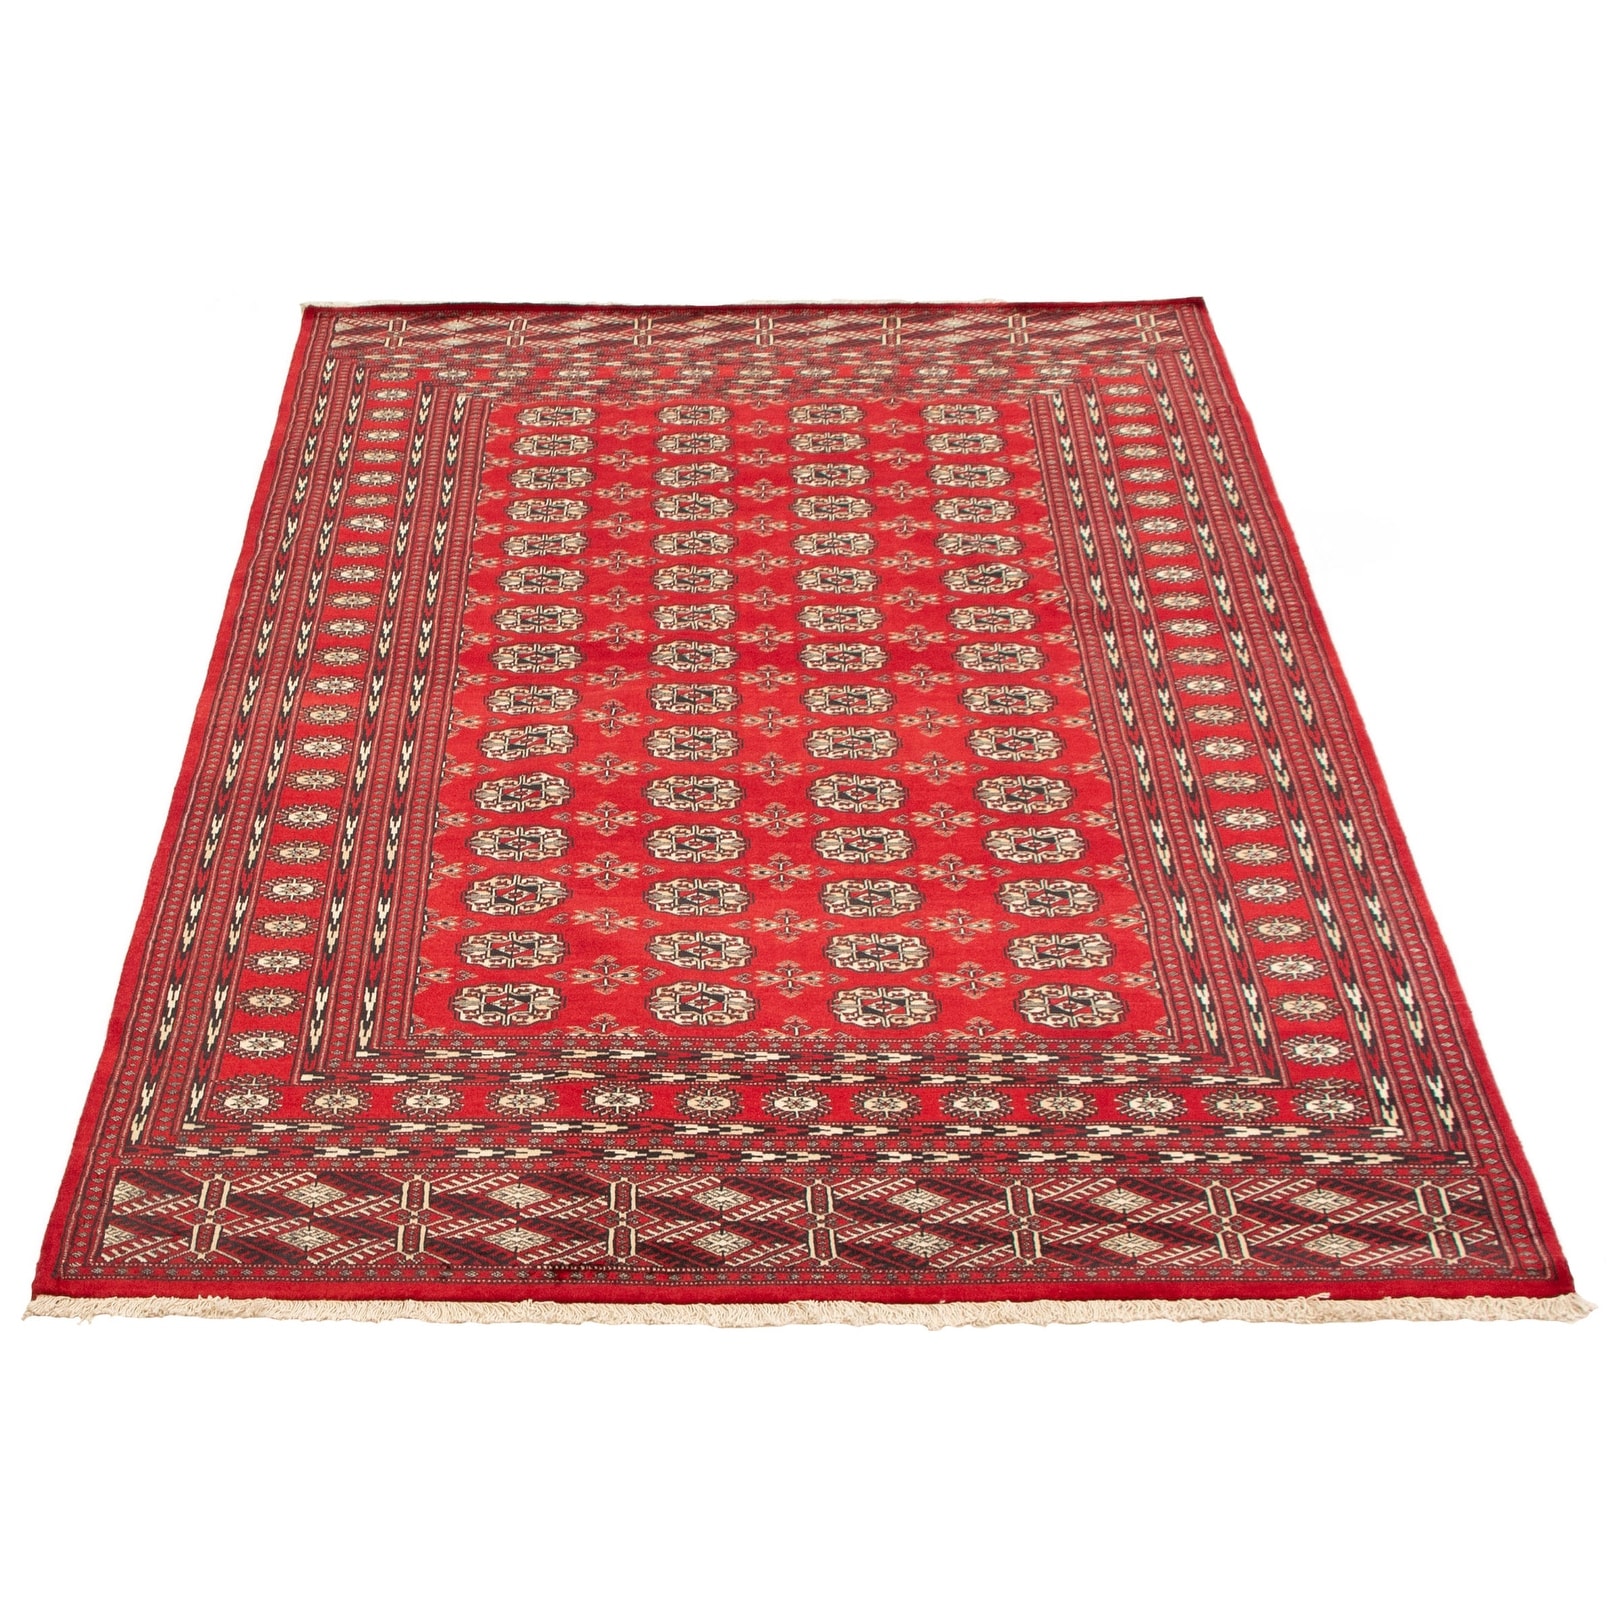 327506 Bedroom Hand-Knotted Wool Rug Finest Peshawar Bokhara Bordered Red Rug 5'7 x 8'2 eCarpet Gallery Area Rug for Living Room